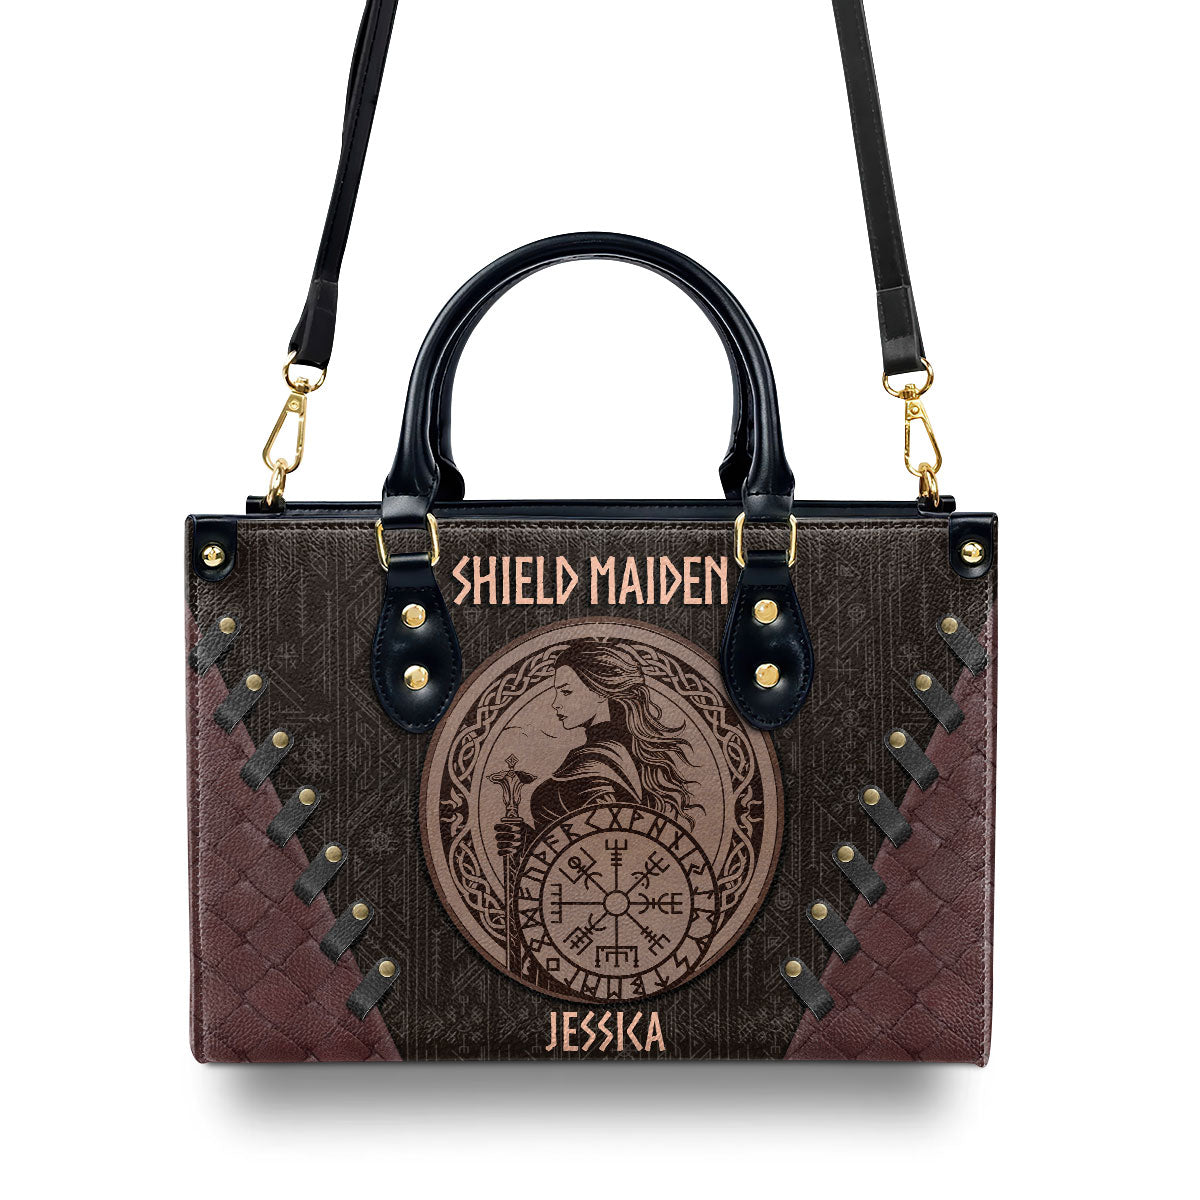 Shield Maiden - Personalized Leather Handbag MS09